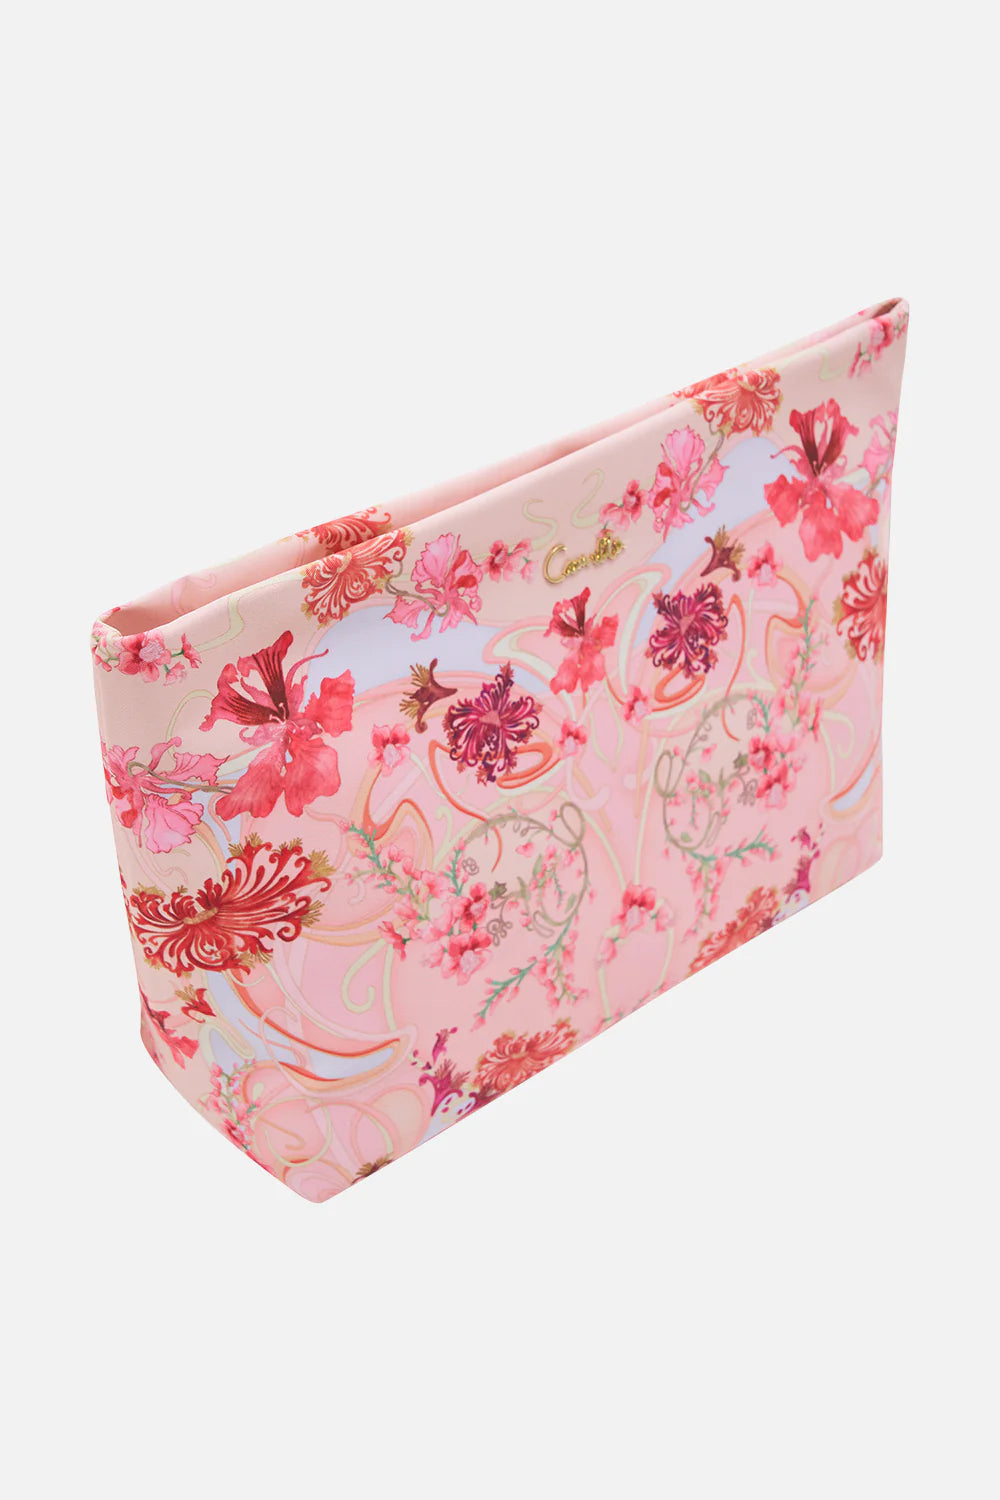 Large Makeup Clutch - Blossoms and Brushstrokes